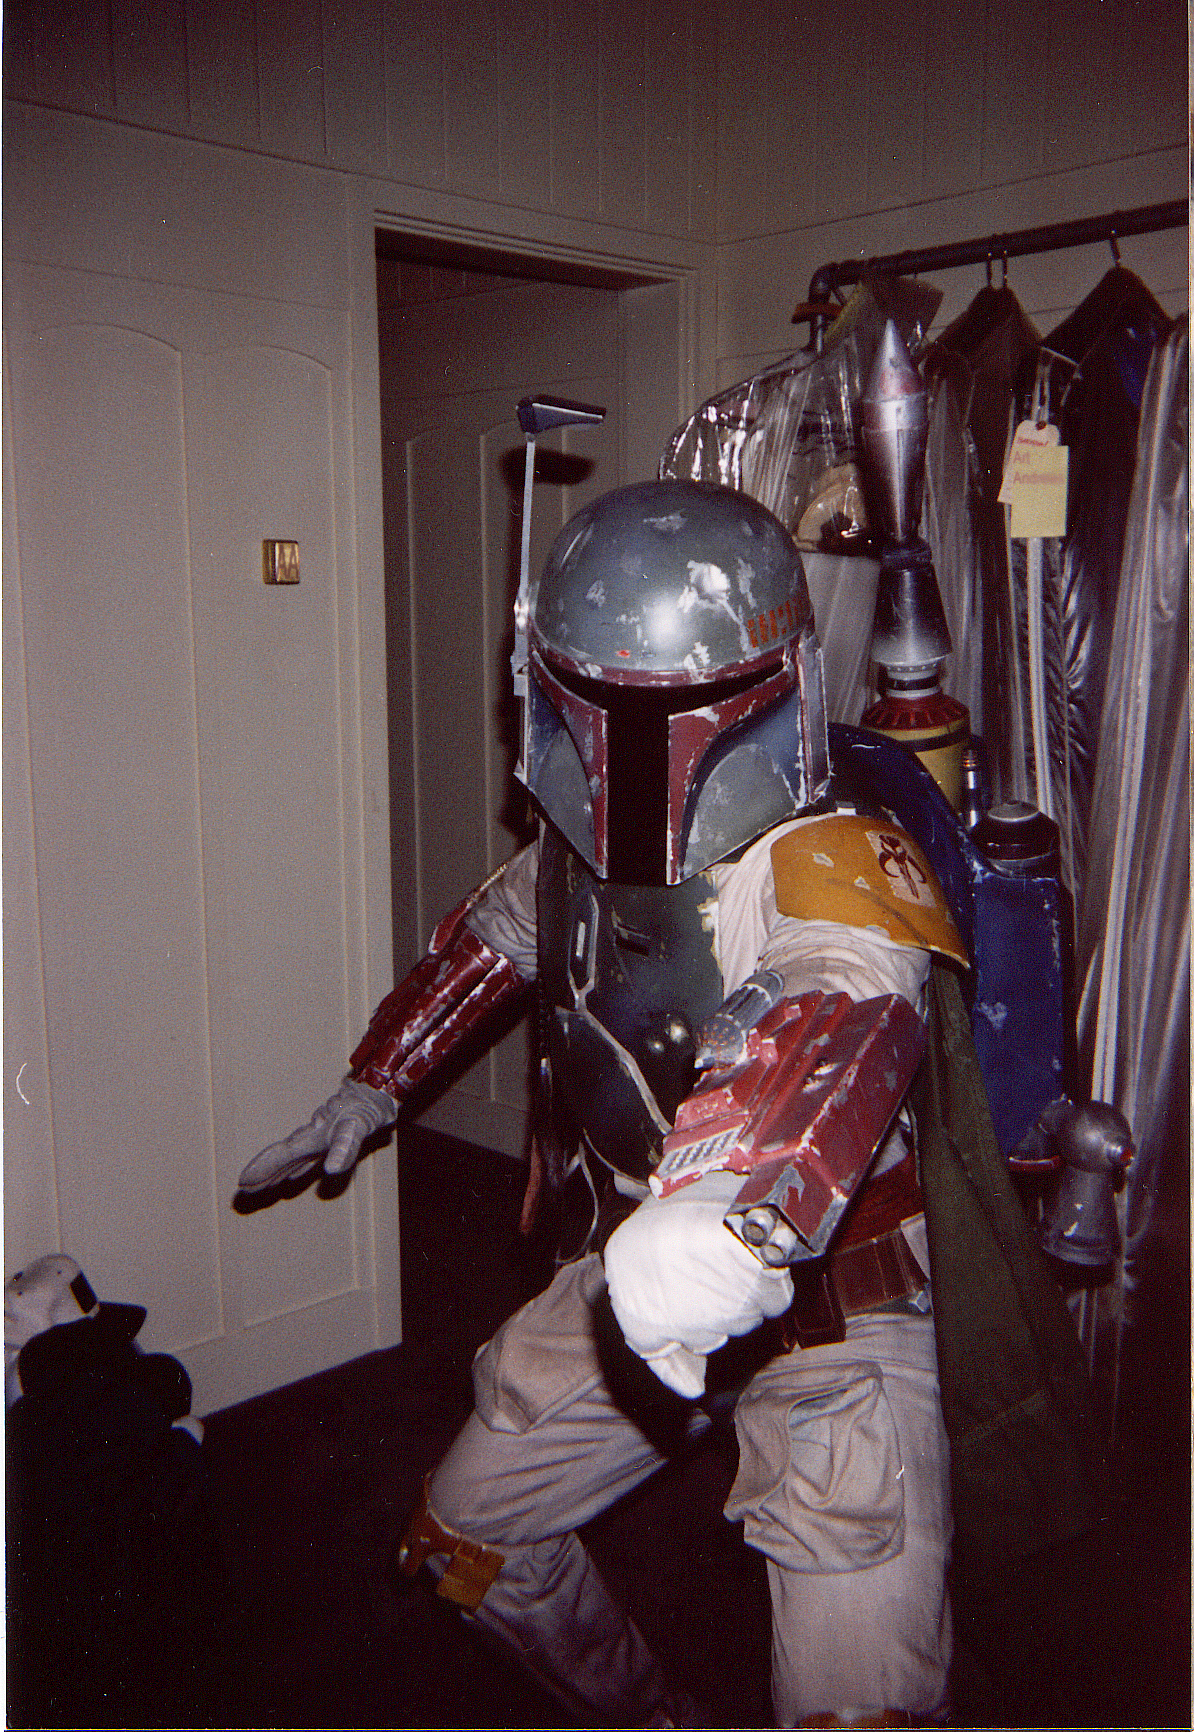 Boba Fett Special Edition Costume - A New Hope